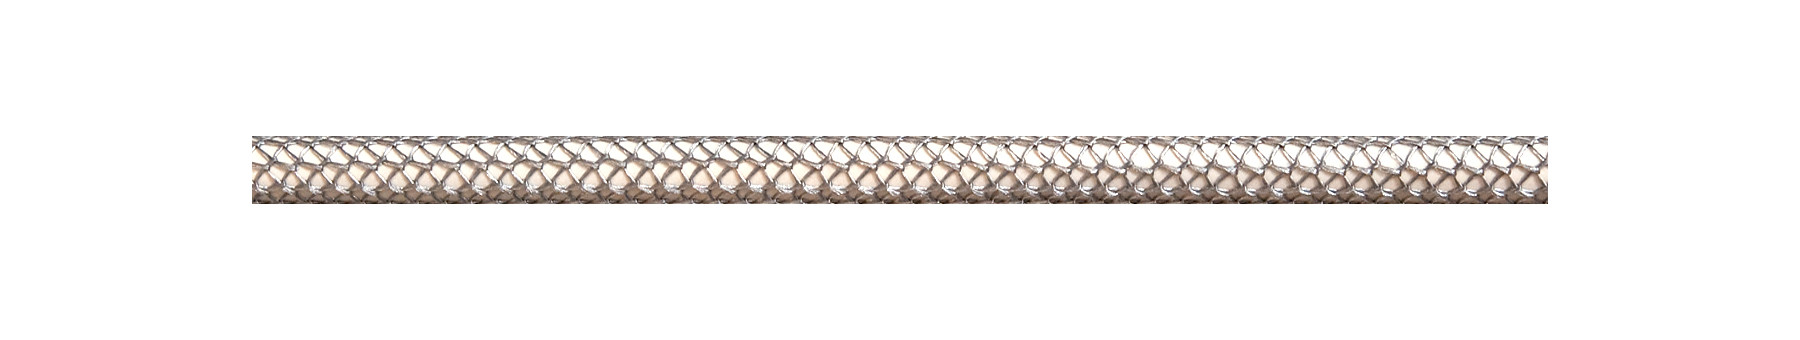 Textile Cable Silver-Grey Netlike Textile Covering